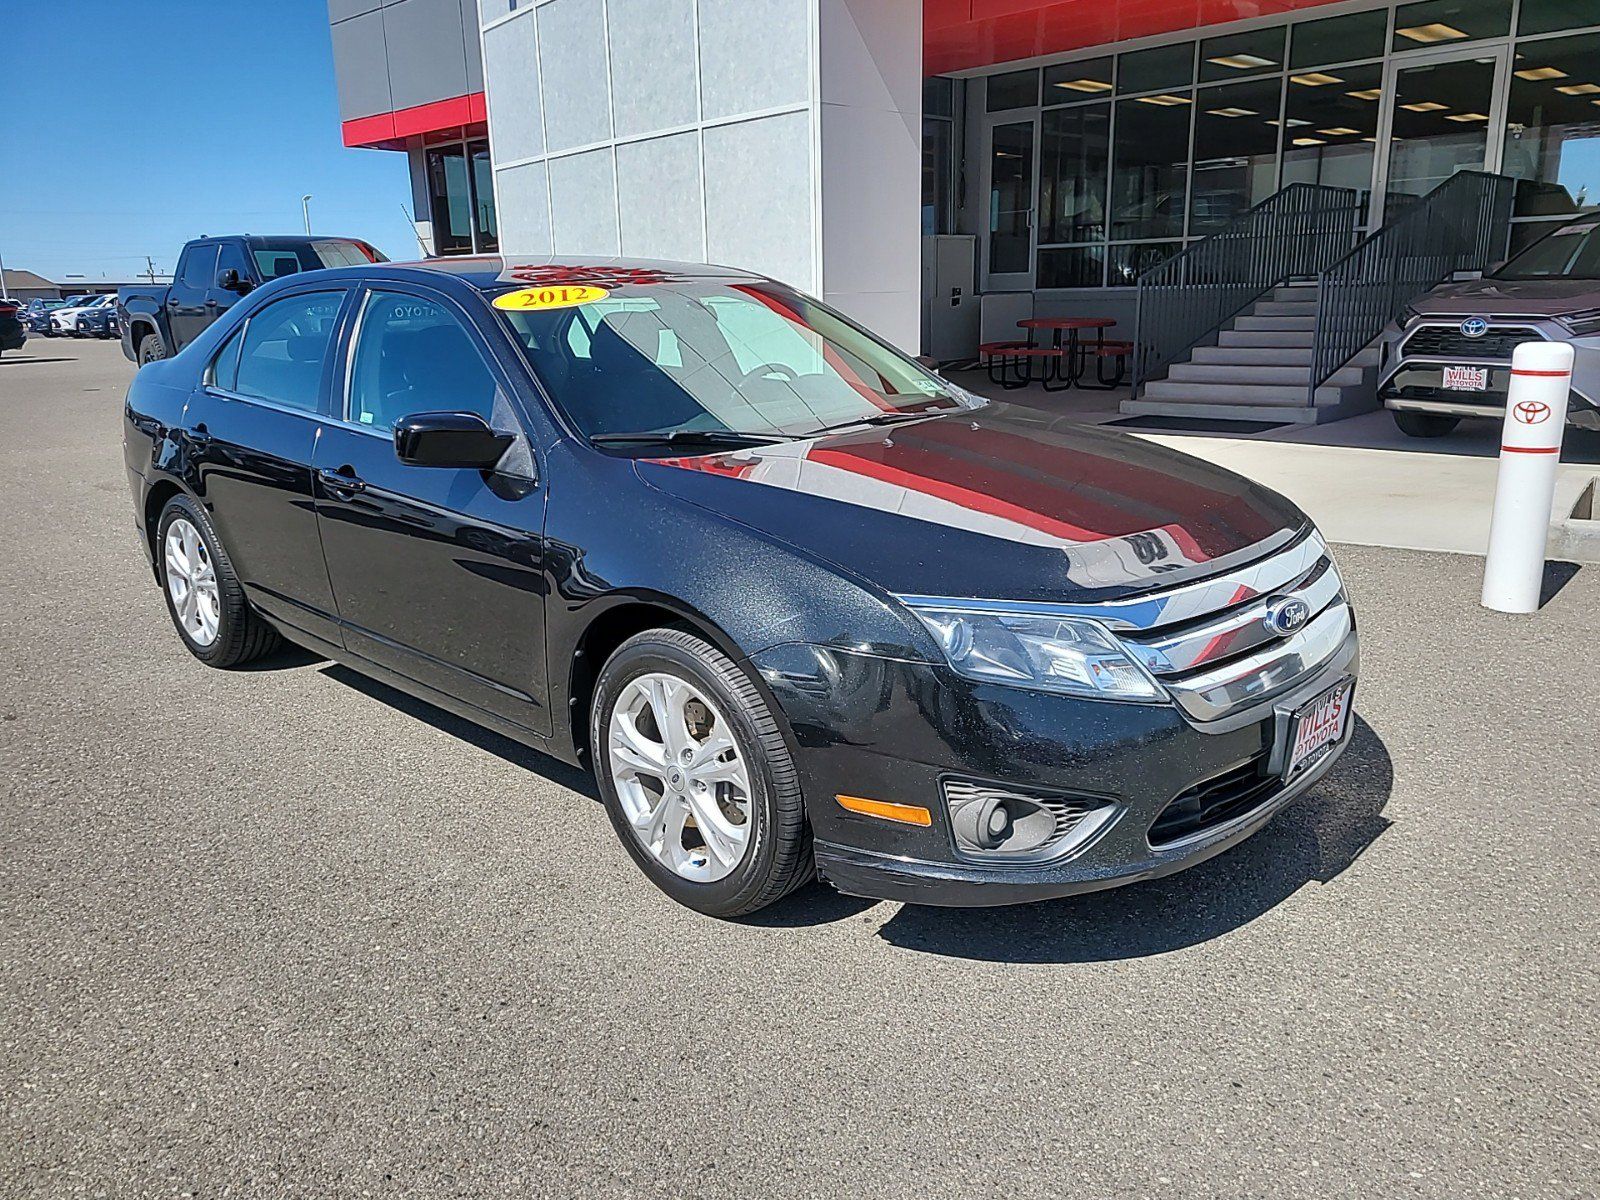 2012 - Ford - Fusion - $8,333